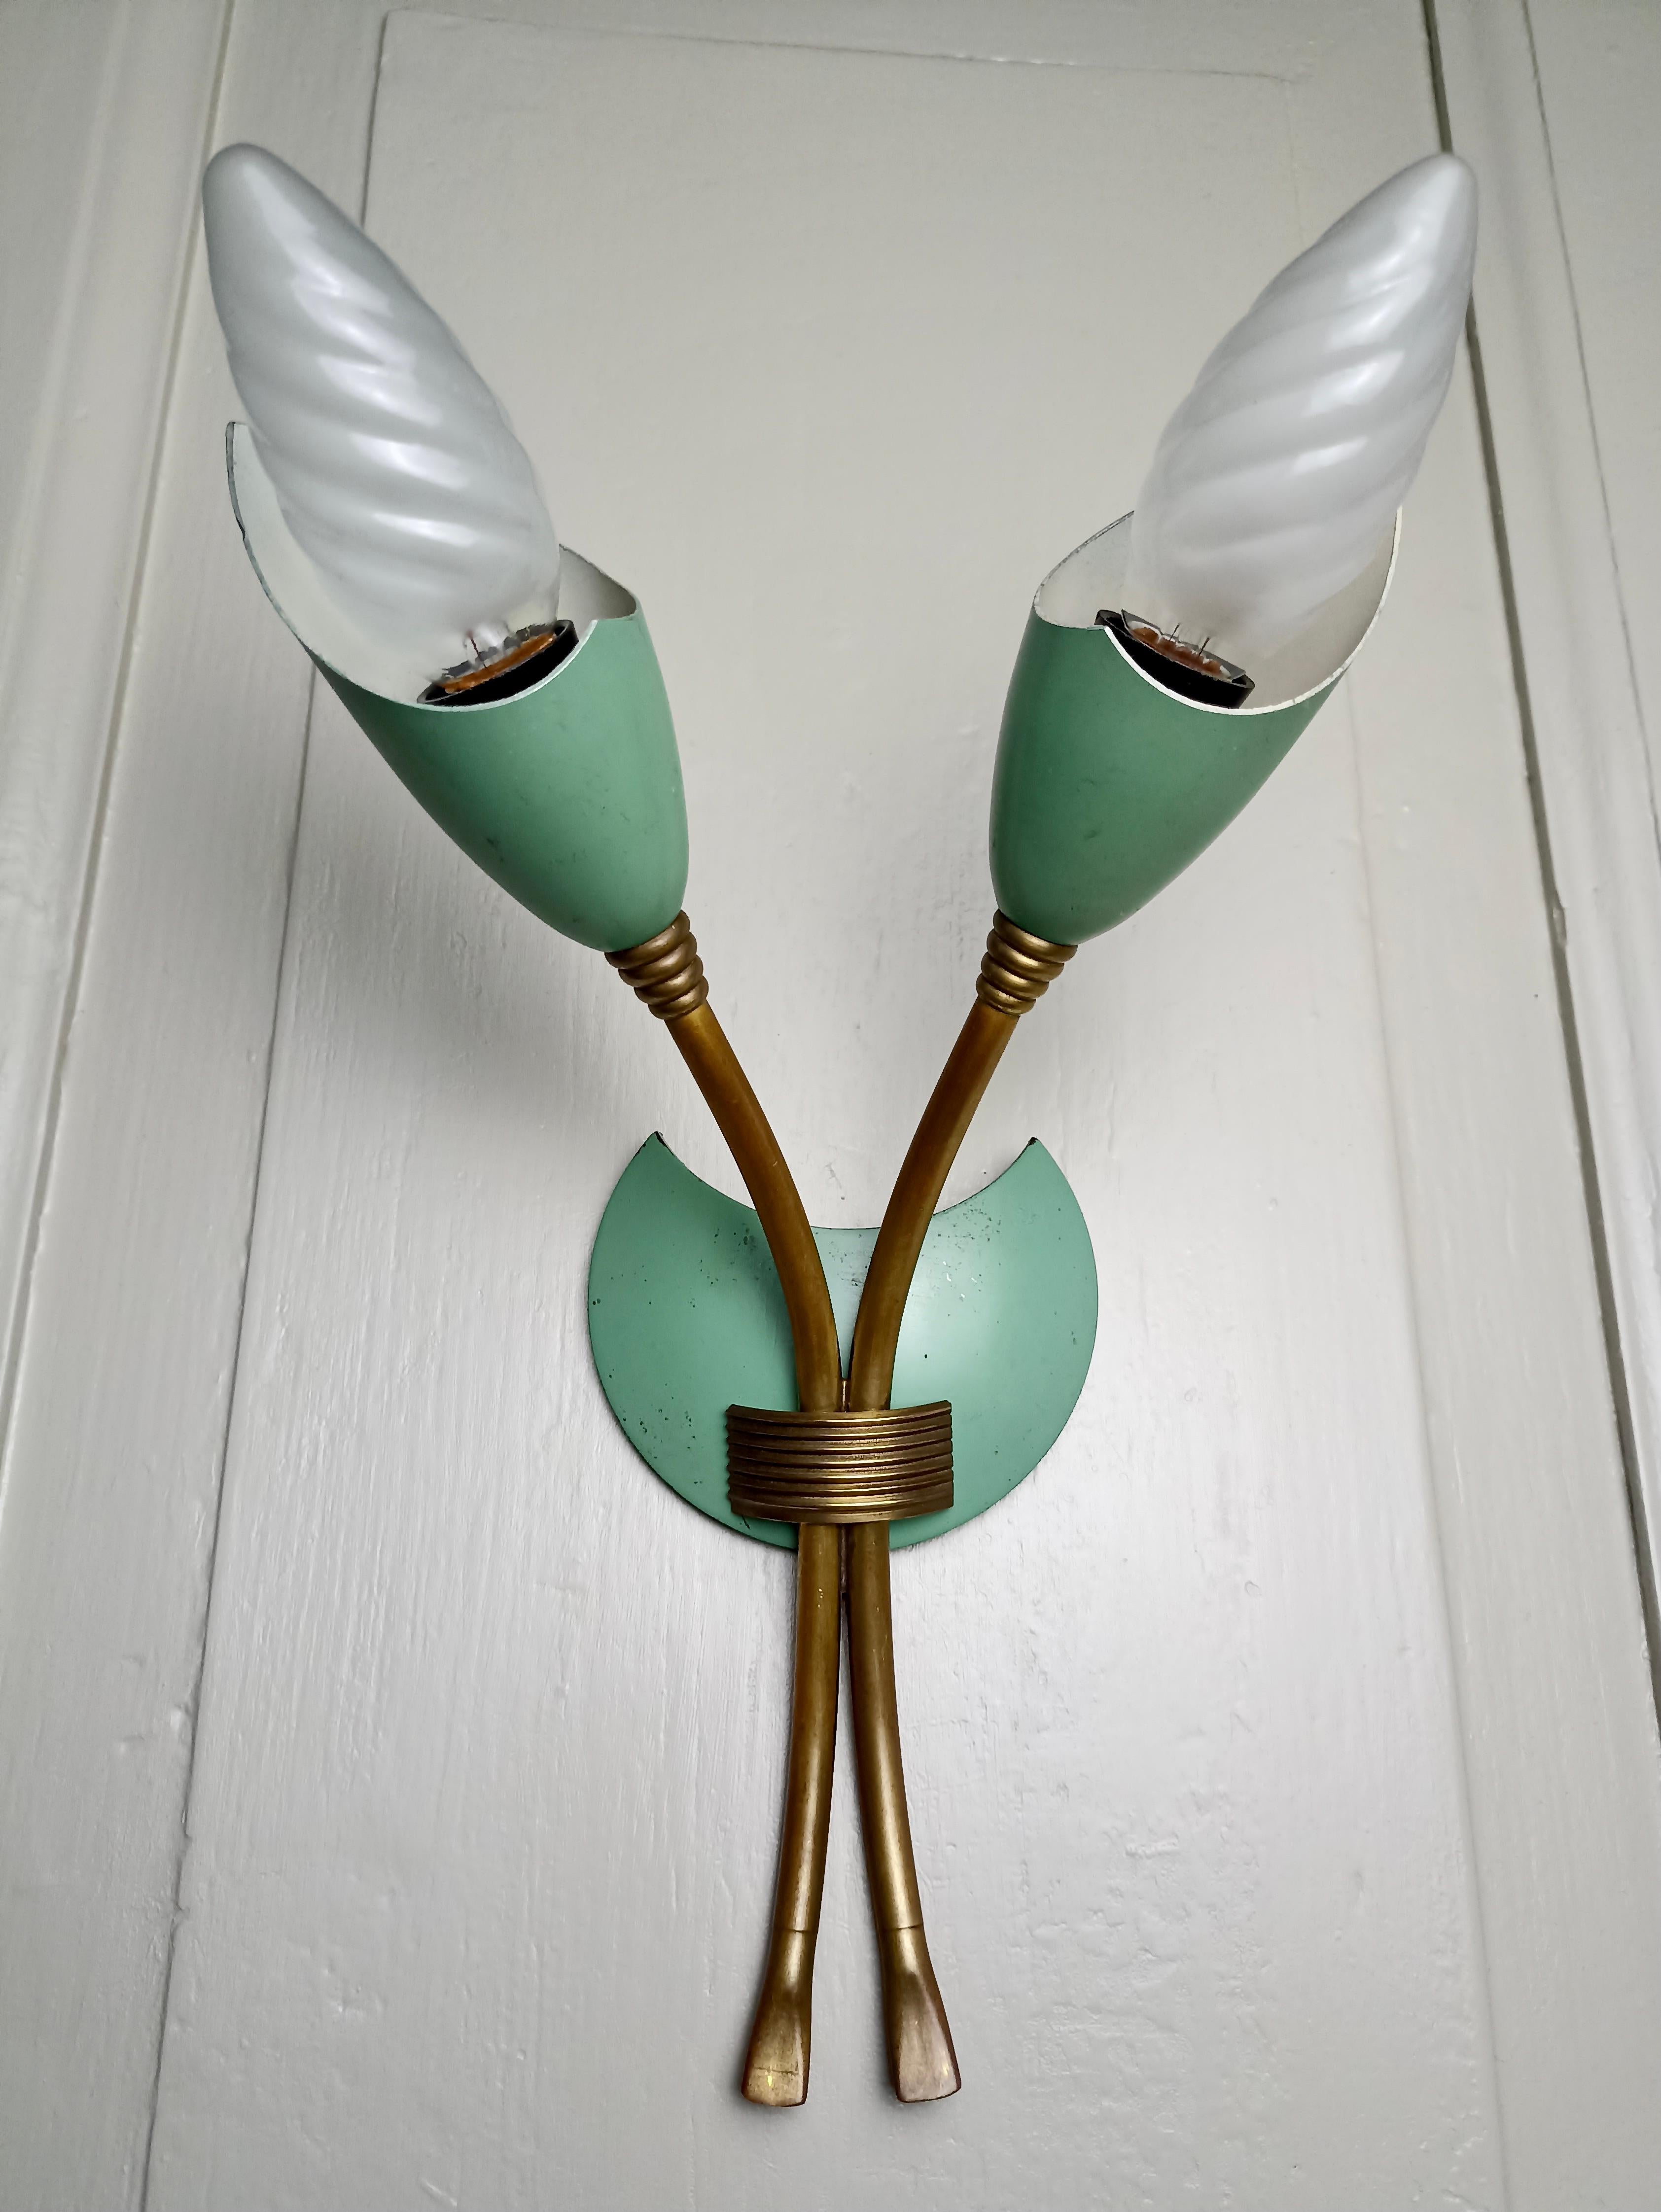 Stilnovo Style 1950s Two-Light Single Sconce, Green Lacquered Metal and Brass In Good Condition For Sale In Caprino Veronese, VR